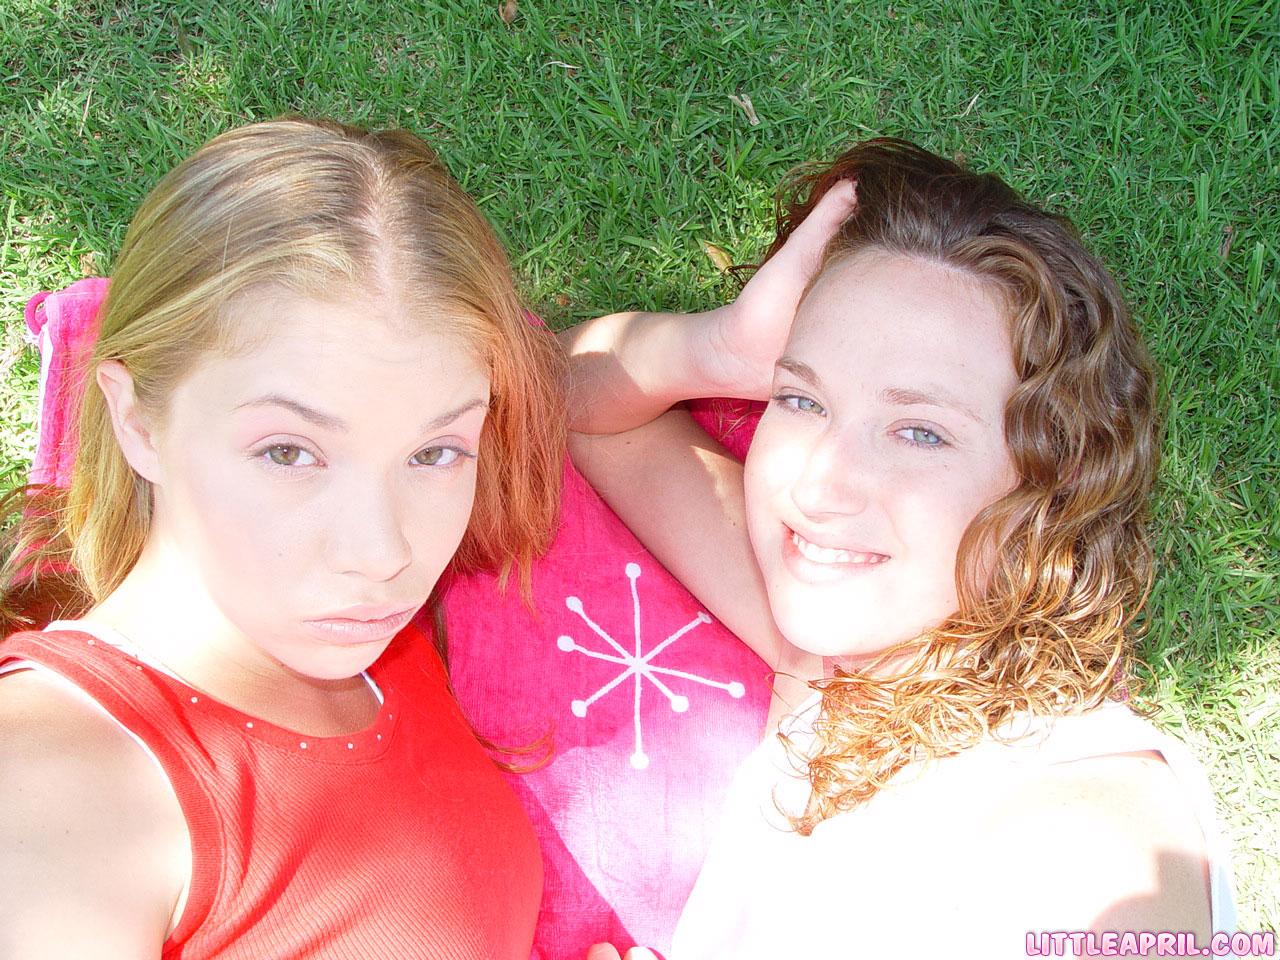 Pictures of two lesbian teens hanging out outside #58994064